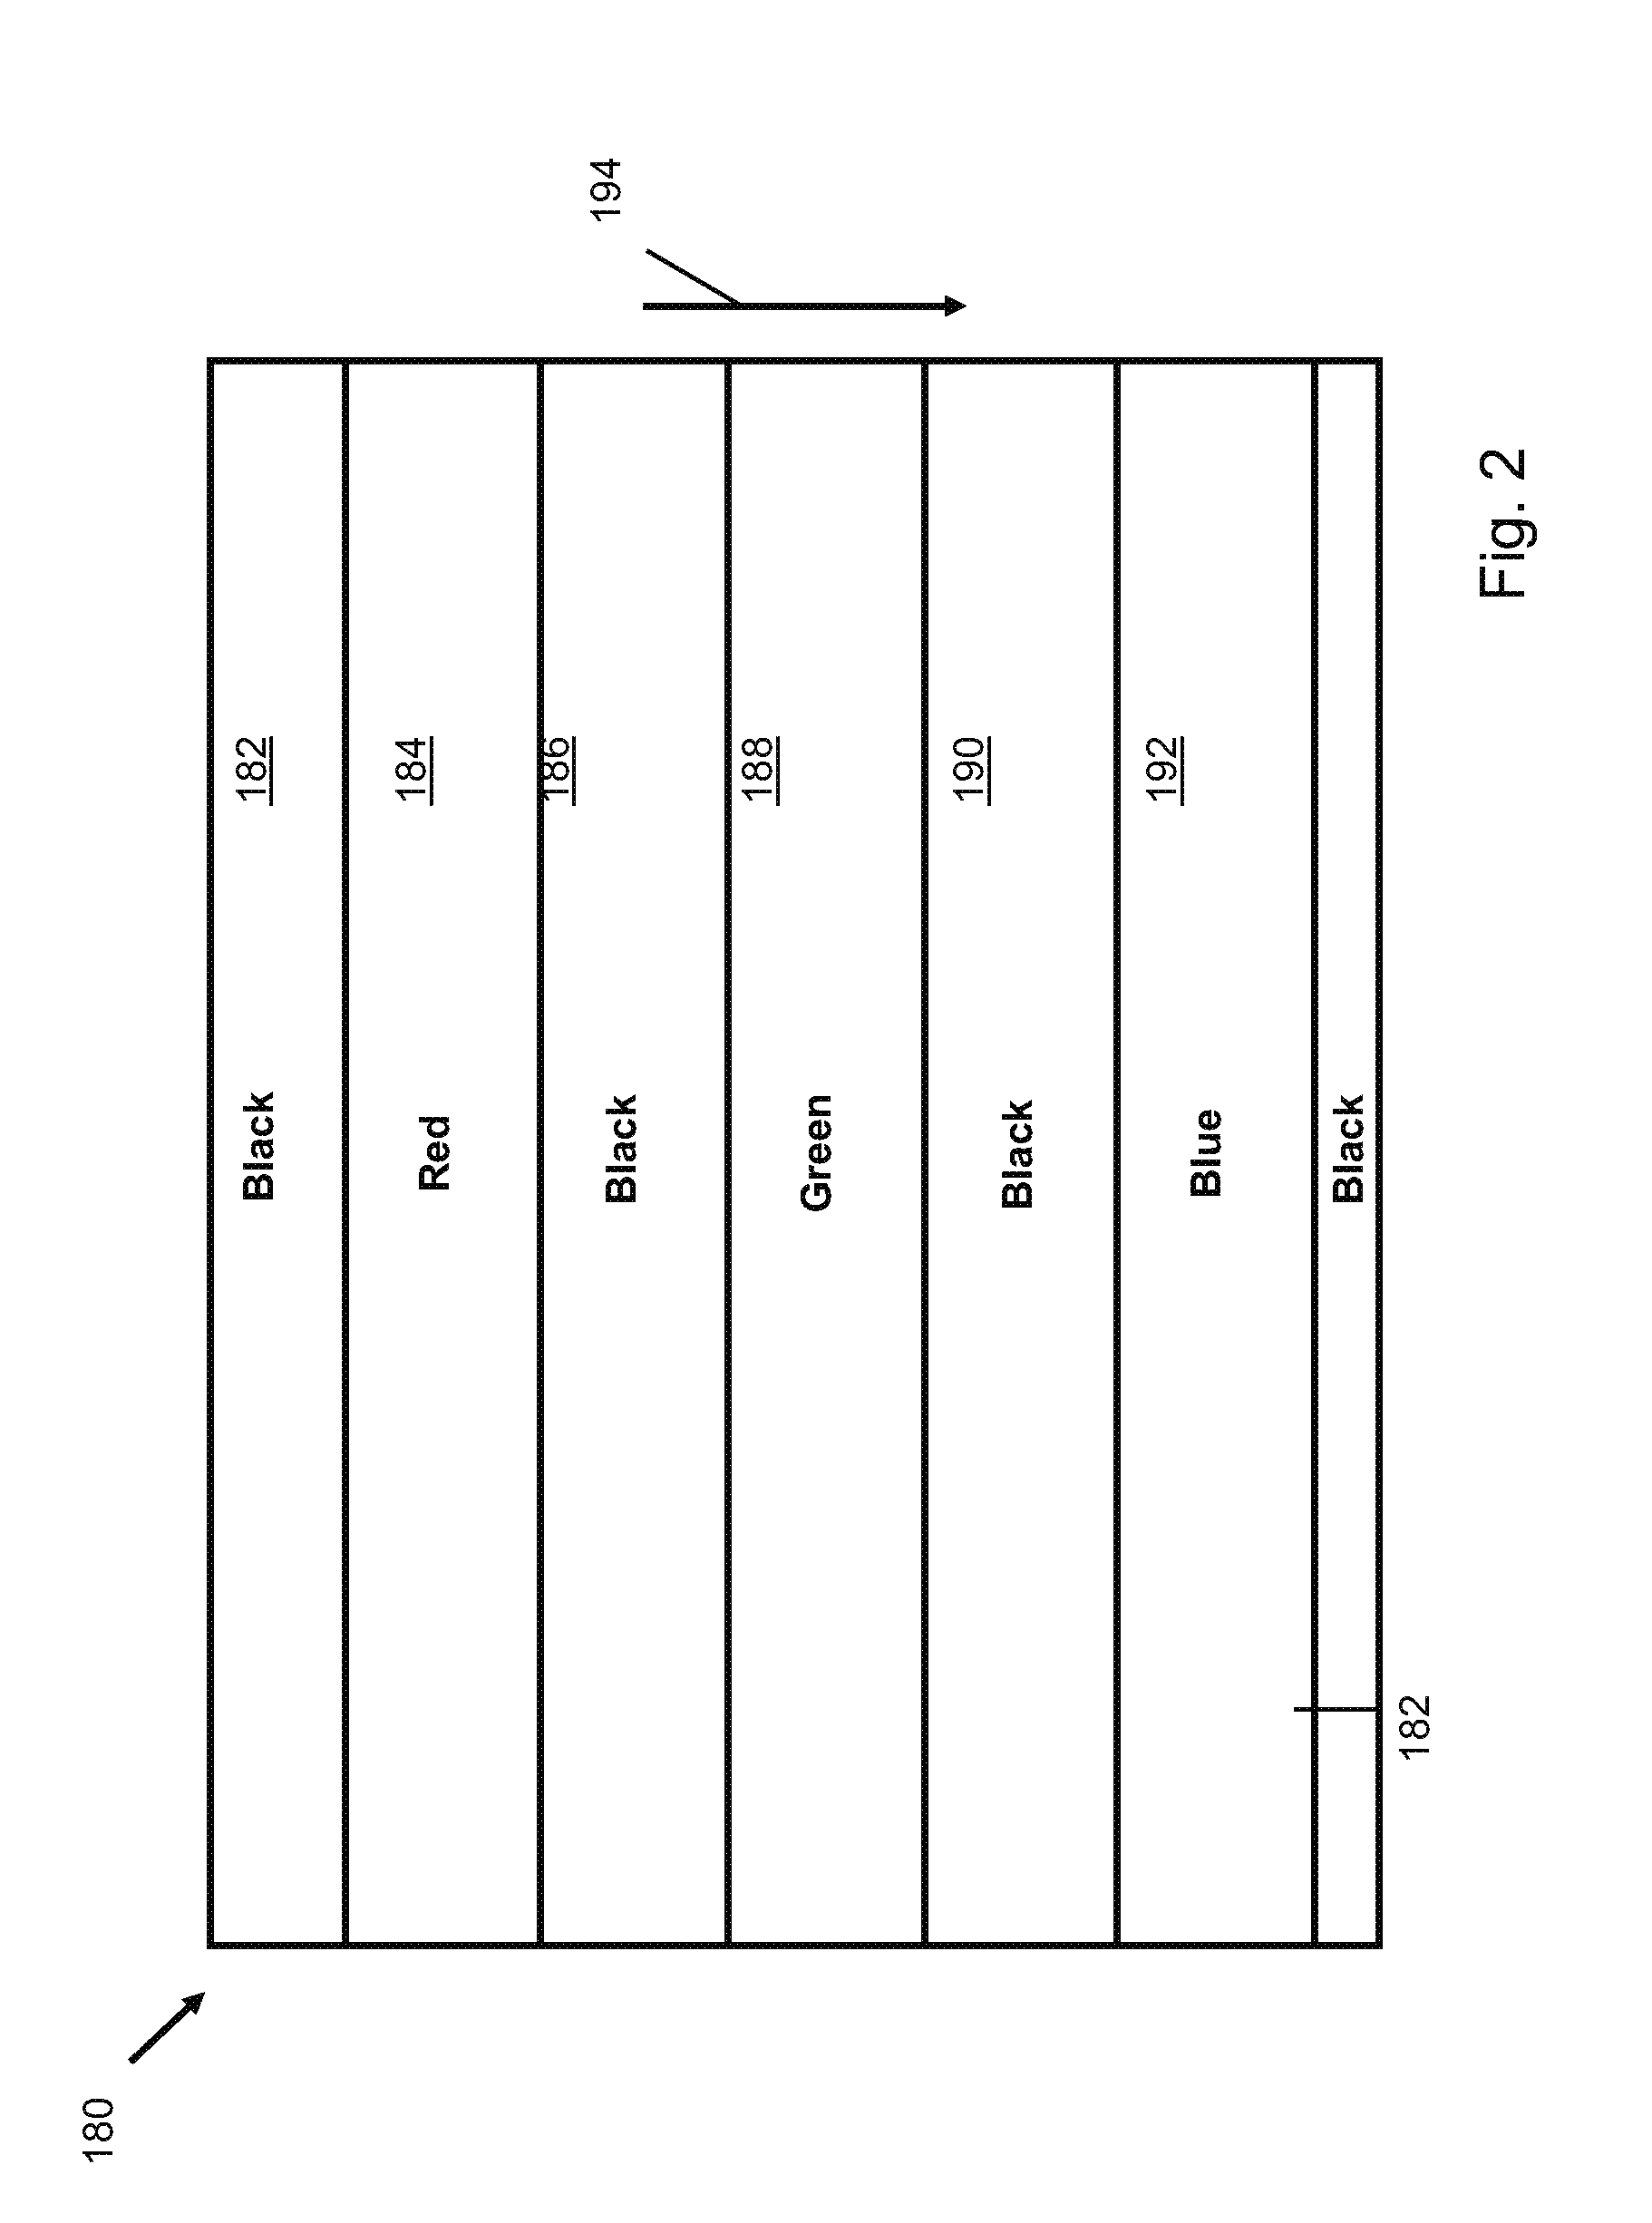 System and Method for Pulse Width Modulating a Scrolling Color Display